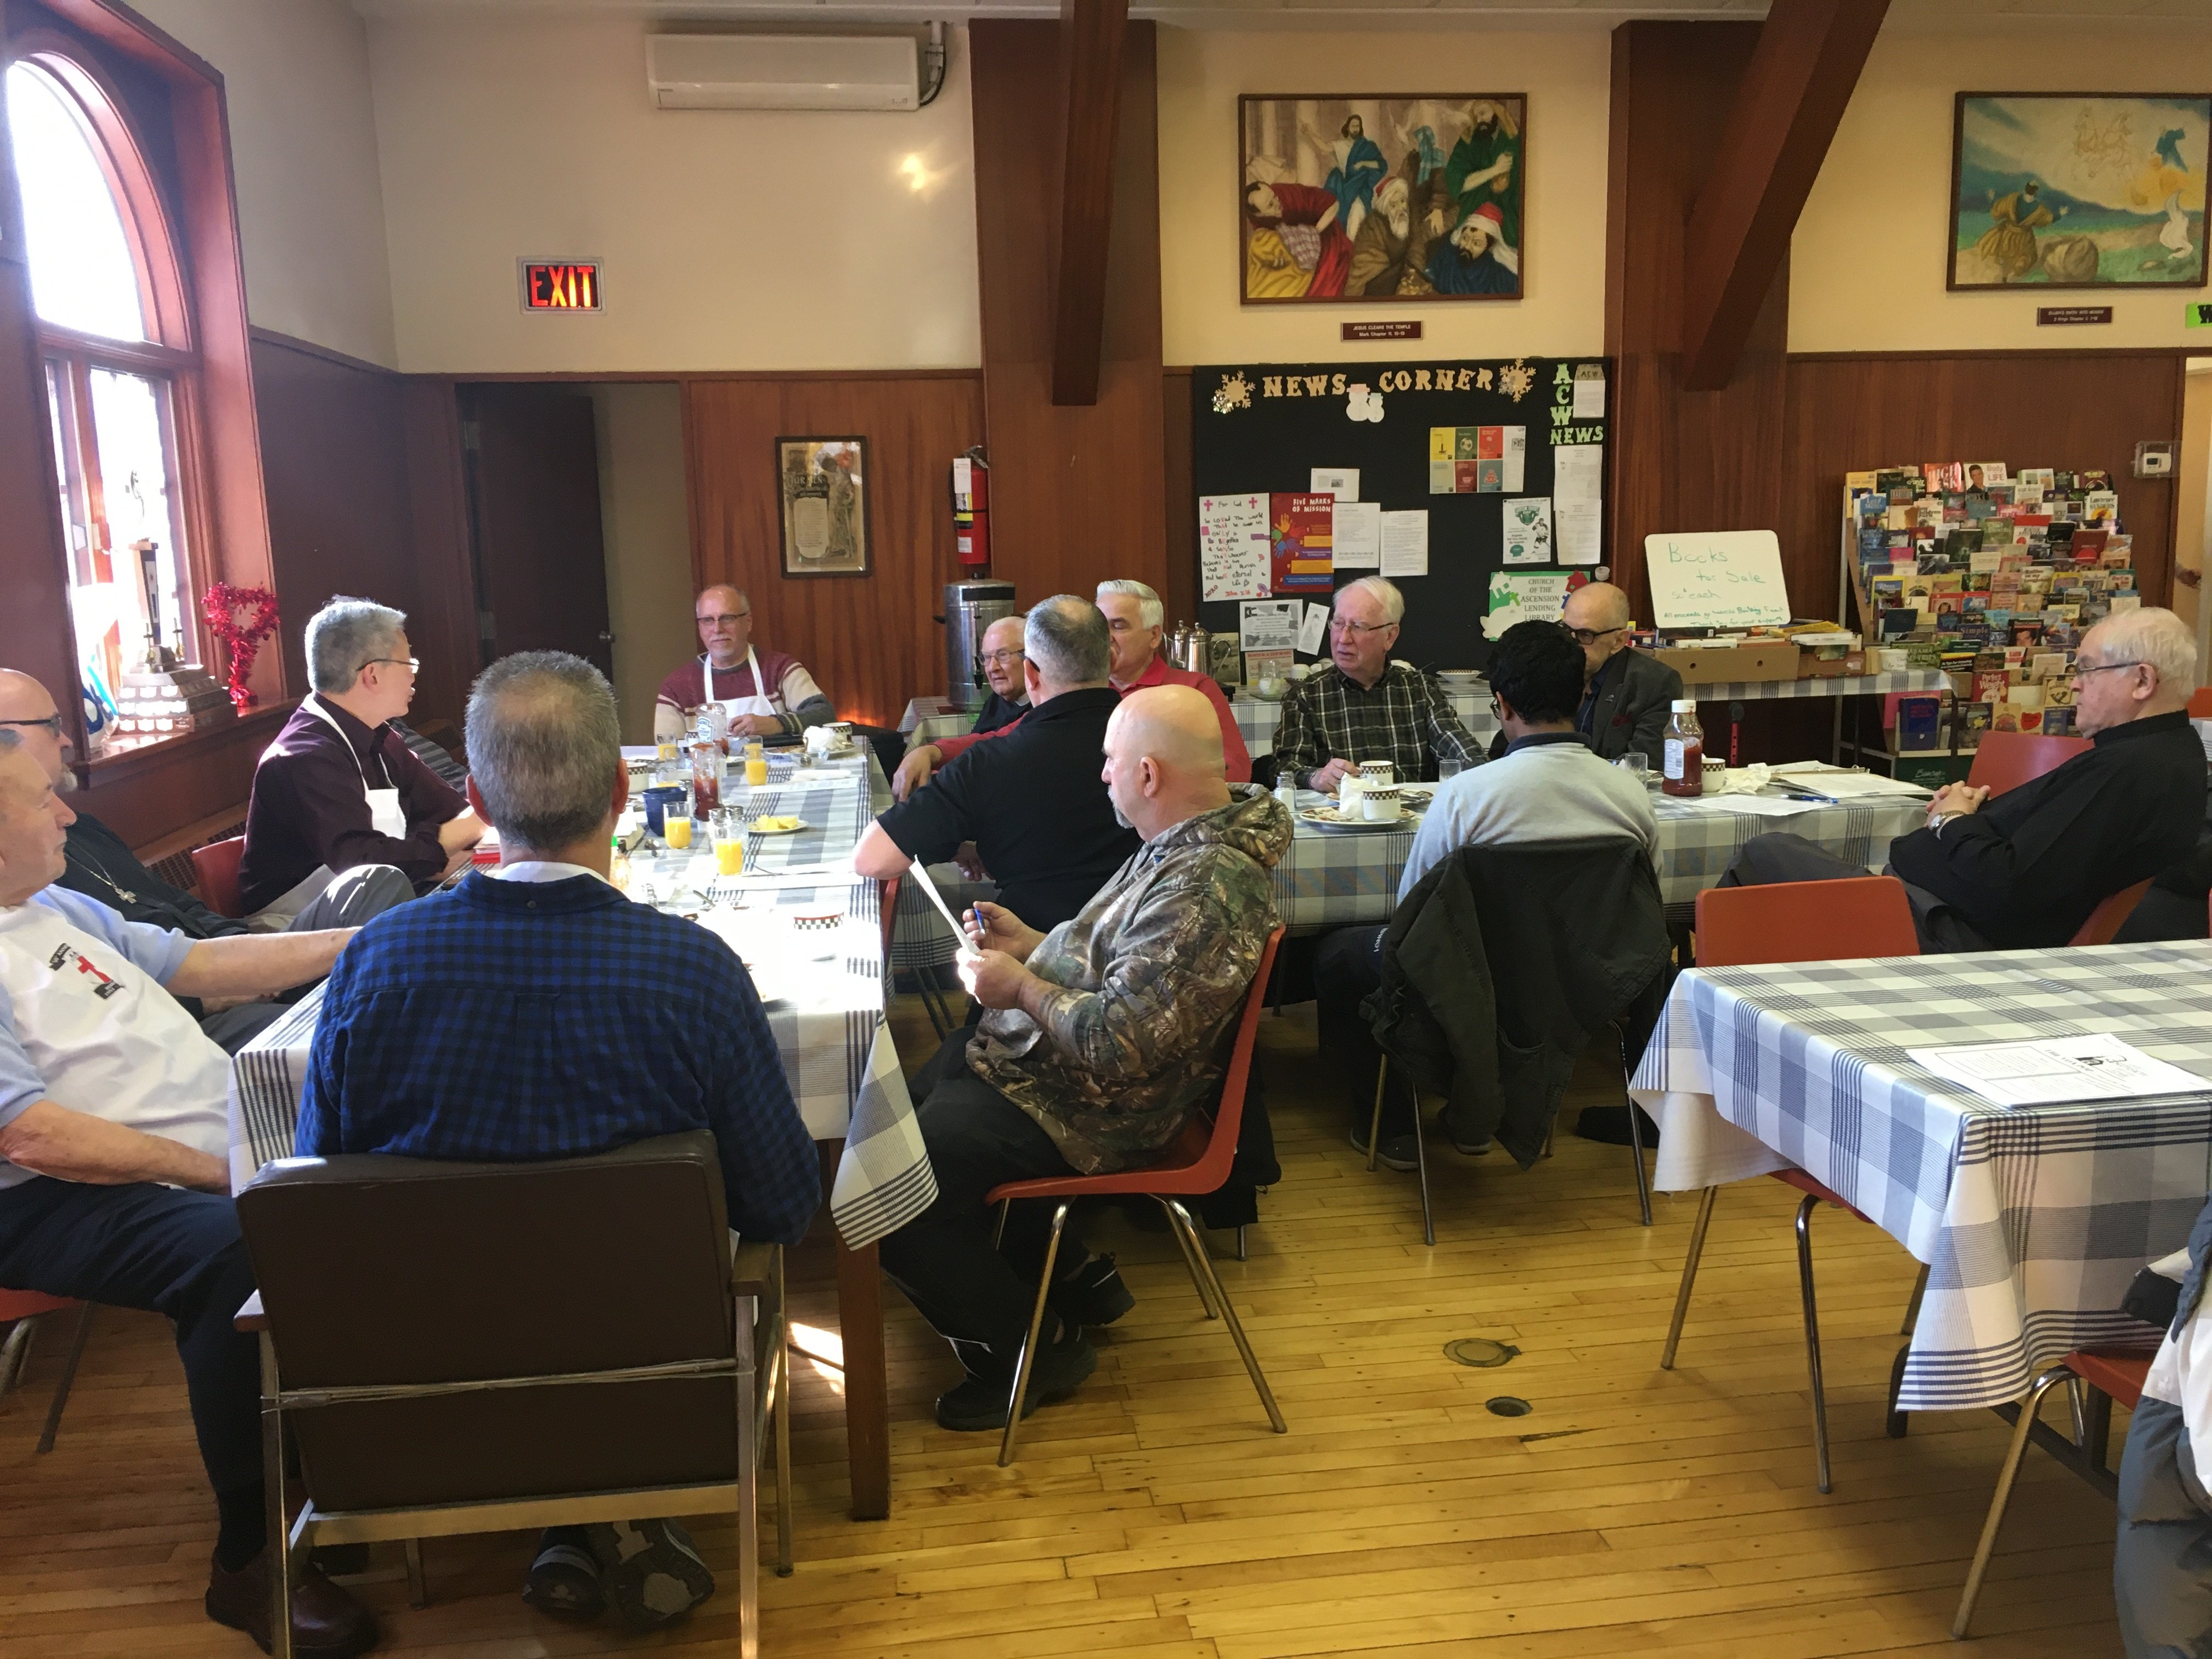 March 8th, 2020 Brotherhood of Anglican Churchmen breakfast meeting, chaired by President Perry